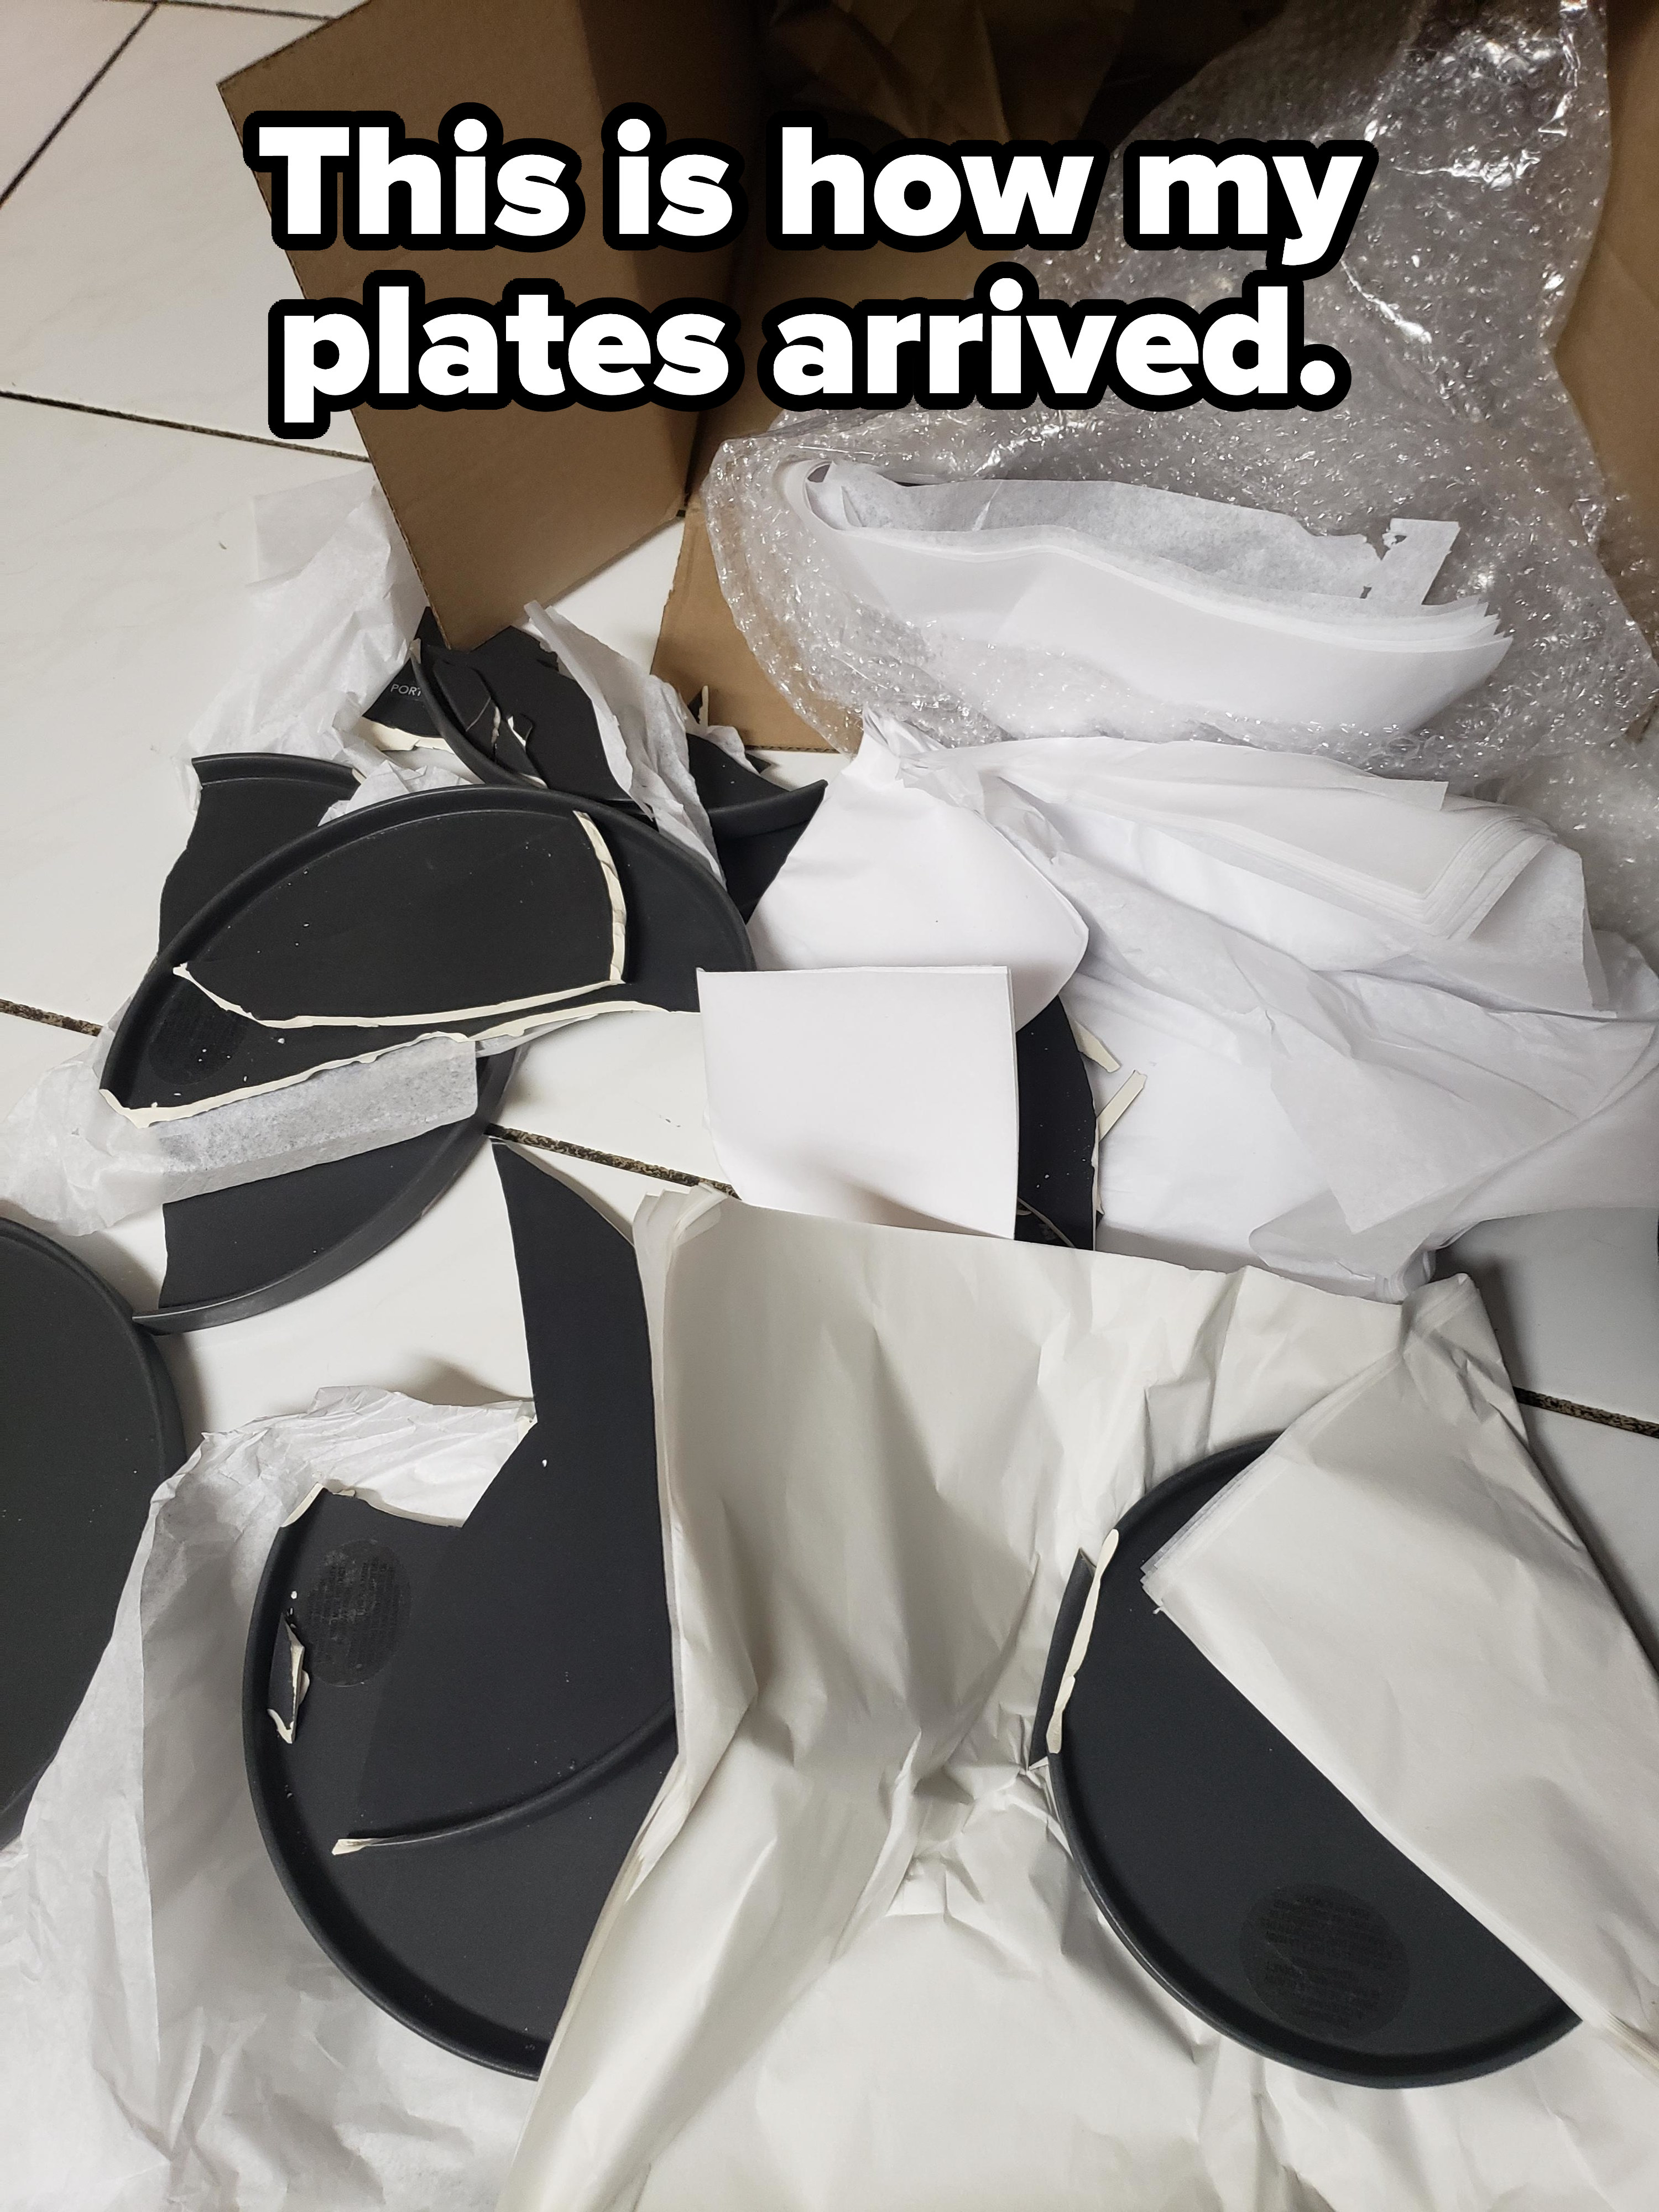 A stack of broken plates